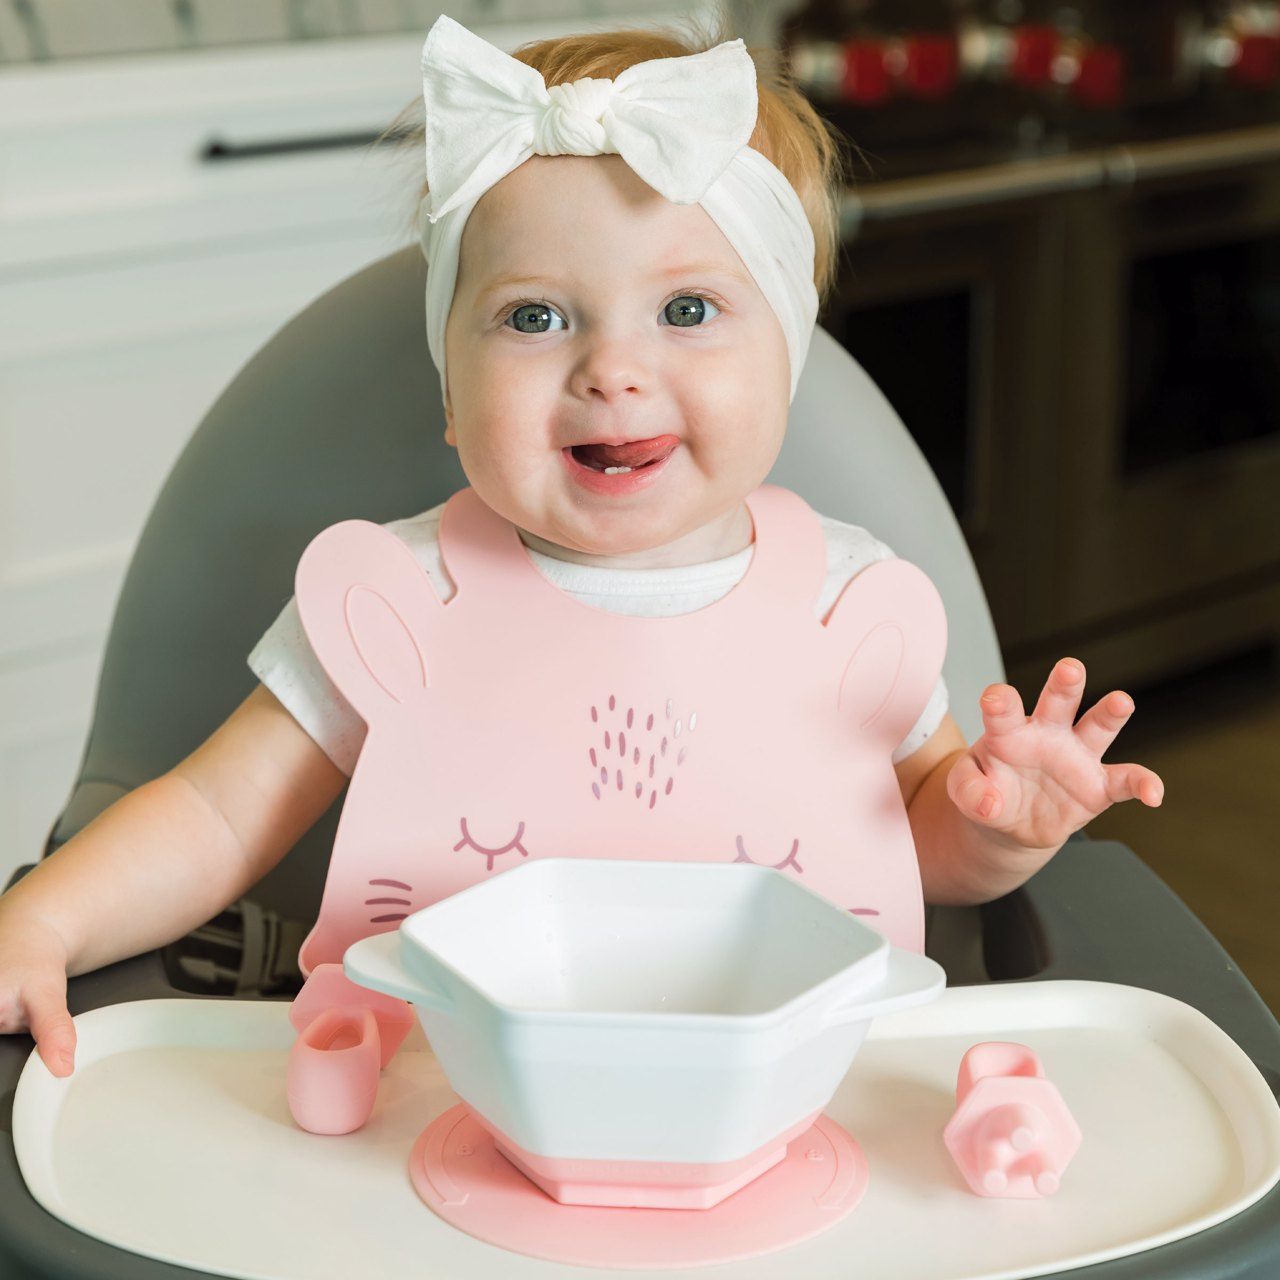 Tiny Twinkle - Silicone Roll-up Bib - Rose Bunny